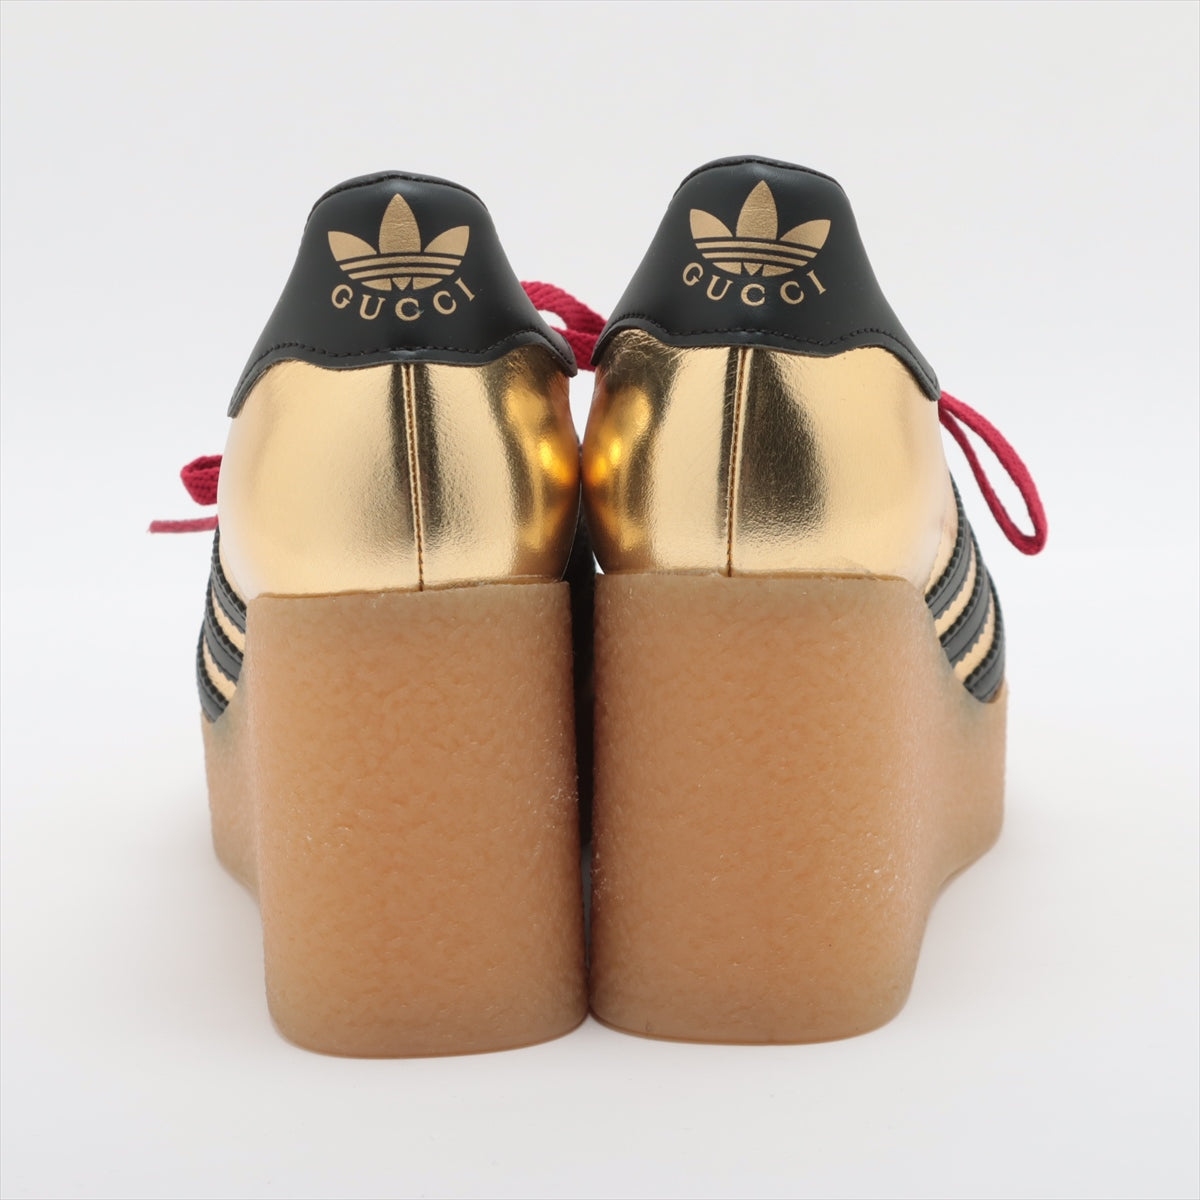 Gucci x adidas Gazelle Patent leather Sneakers EU36 Ladies' gold×black 725628 Wedge soles Is there a replacement string box There is a bag